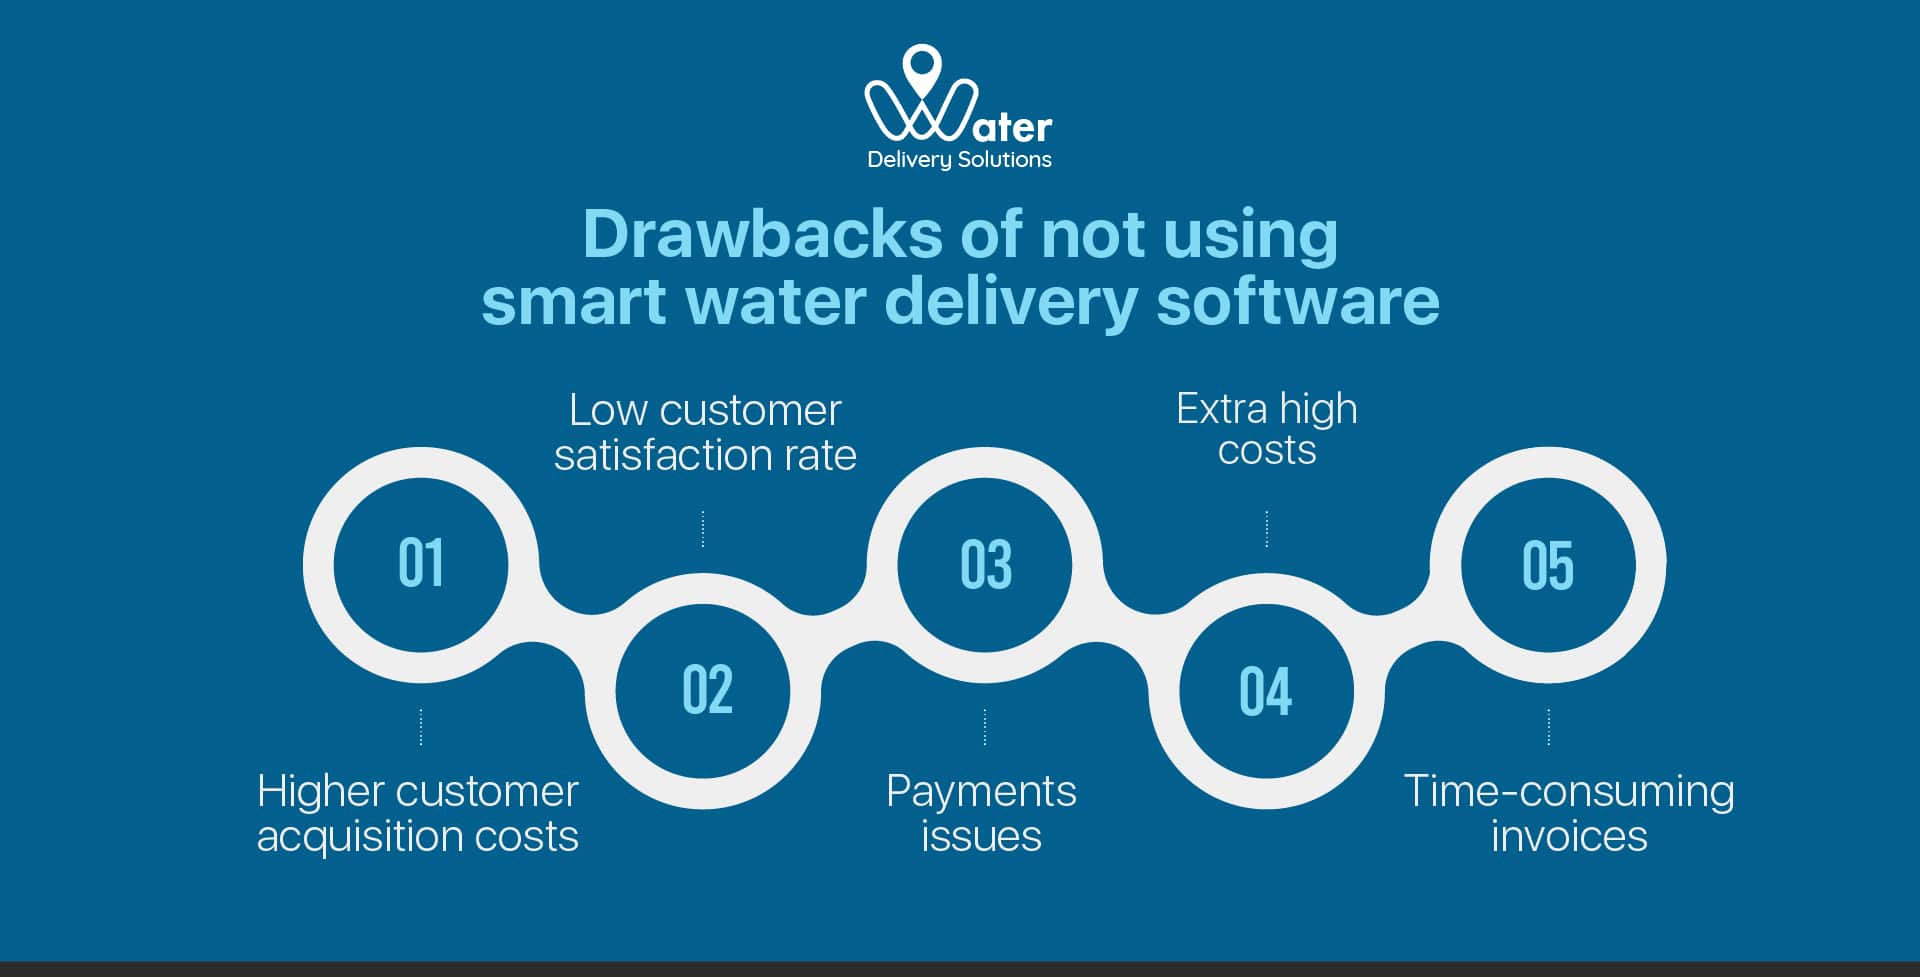 ravi garg, wds, invoices, satisfaction rate, customer acquistion costs. water delivery, software